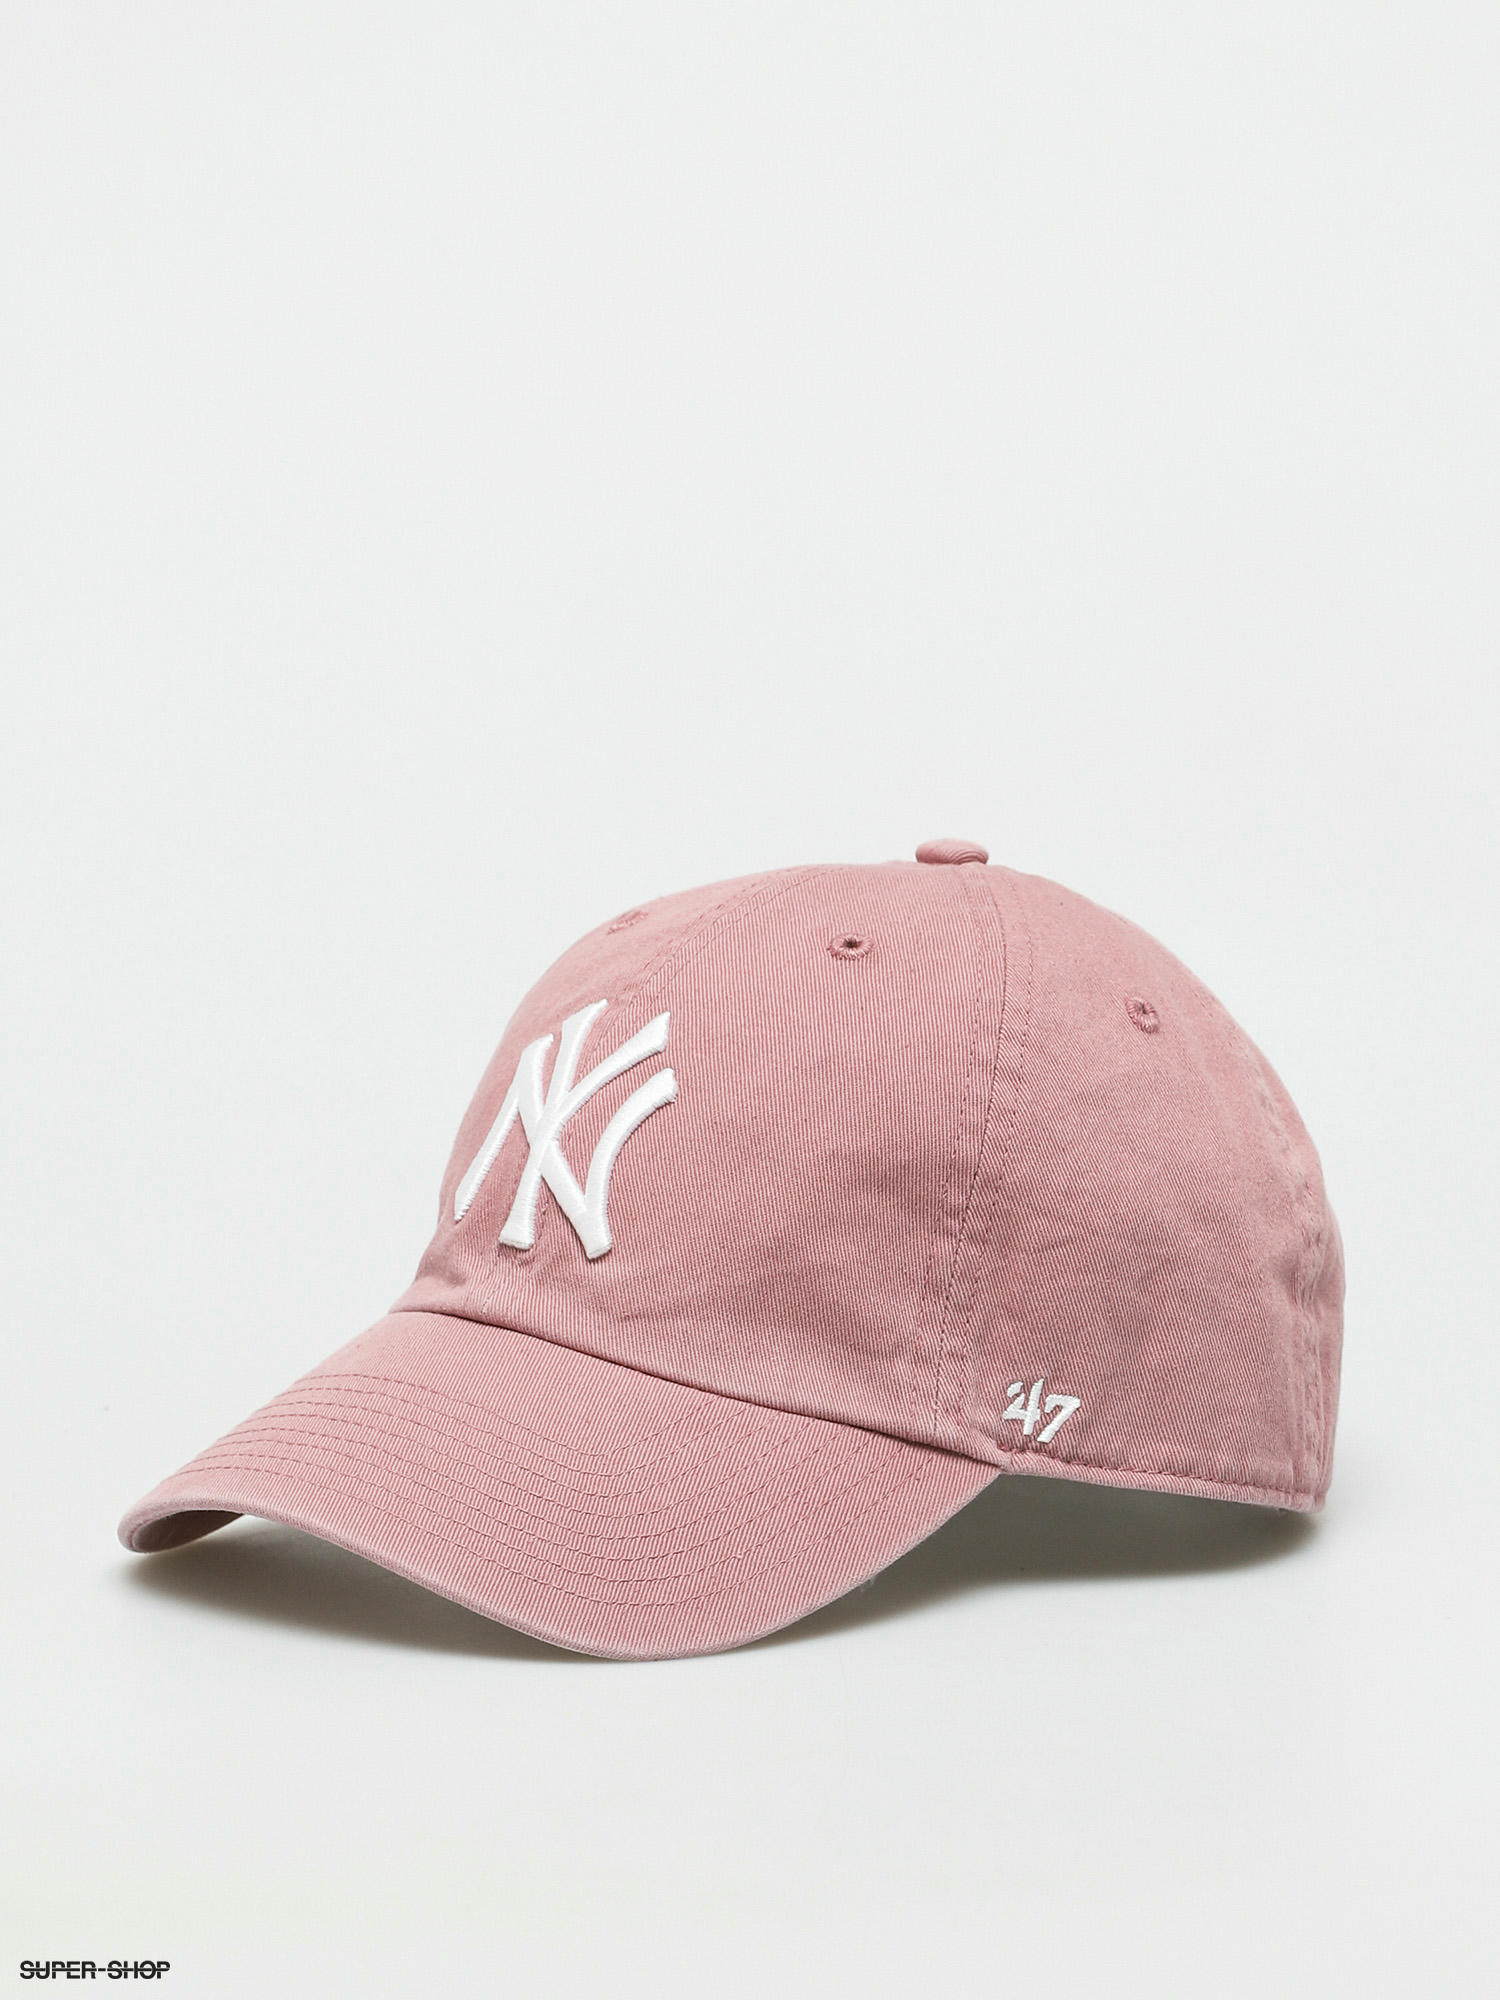 LEGEND New York Yankees mauve 47 Brand Relaxed Fit Cap 